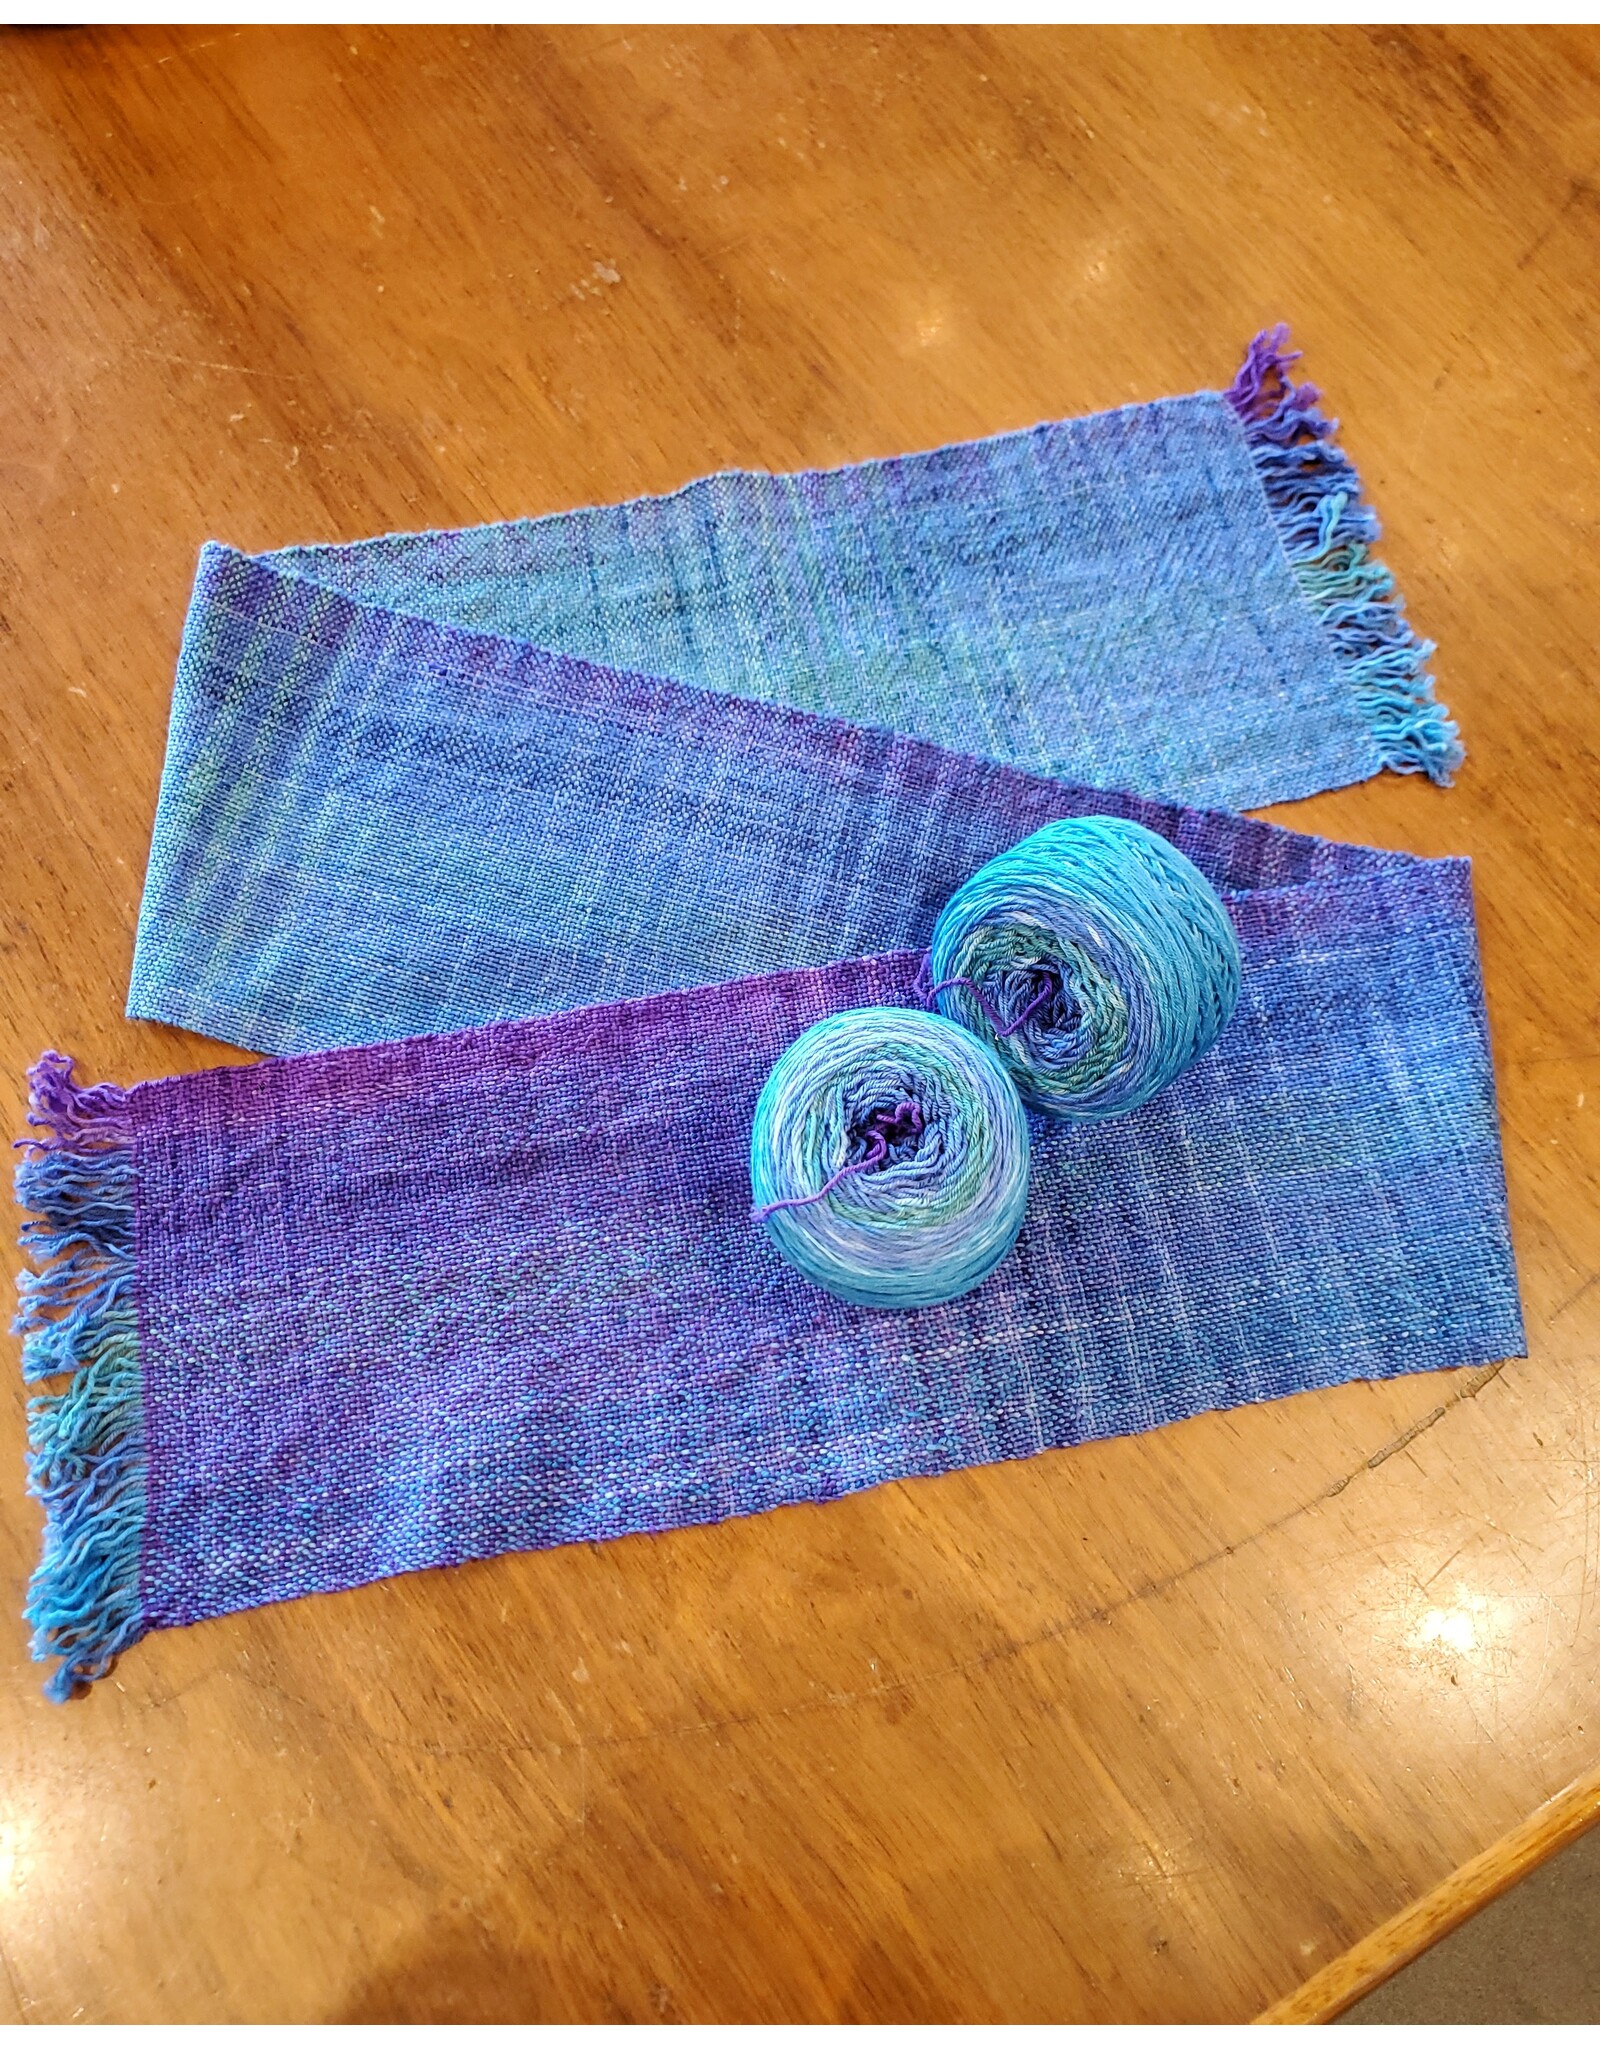 Stranded by the Sea Weaving Class - Next Steps in Rigid Heddle Weaving